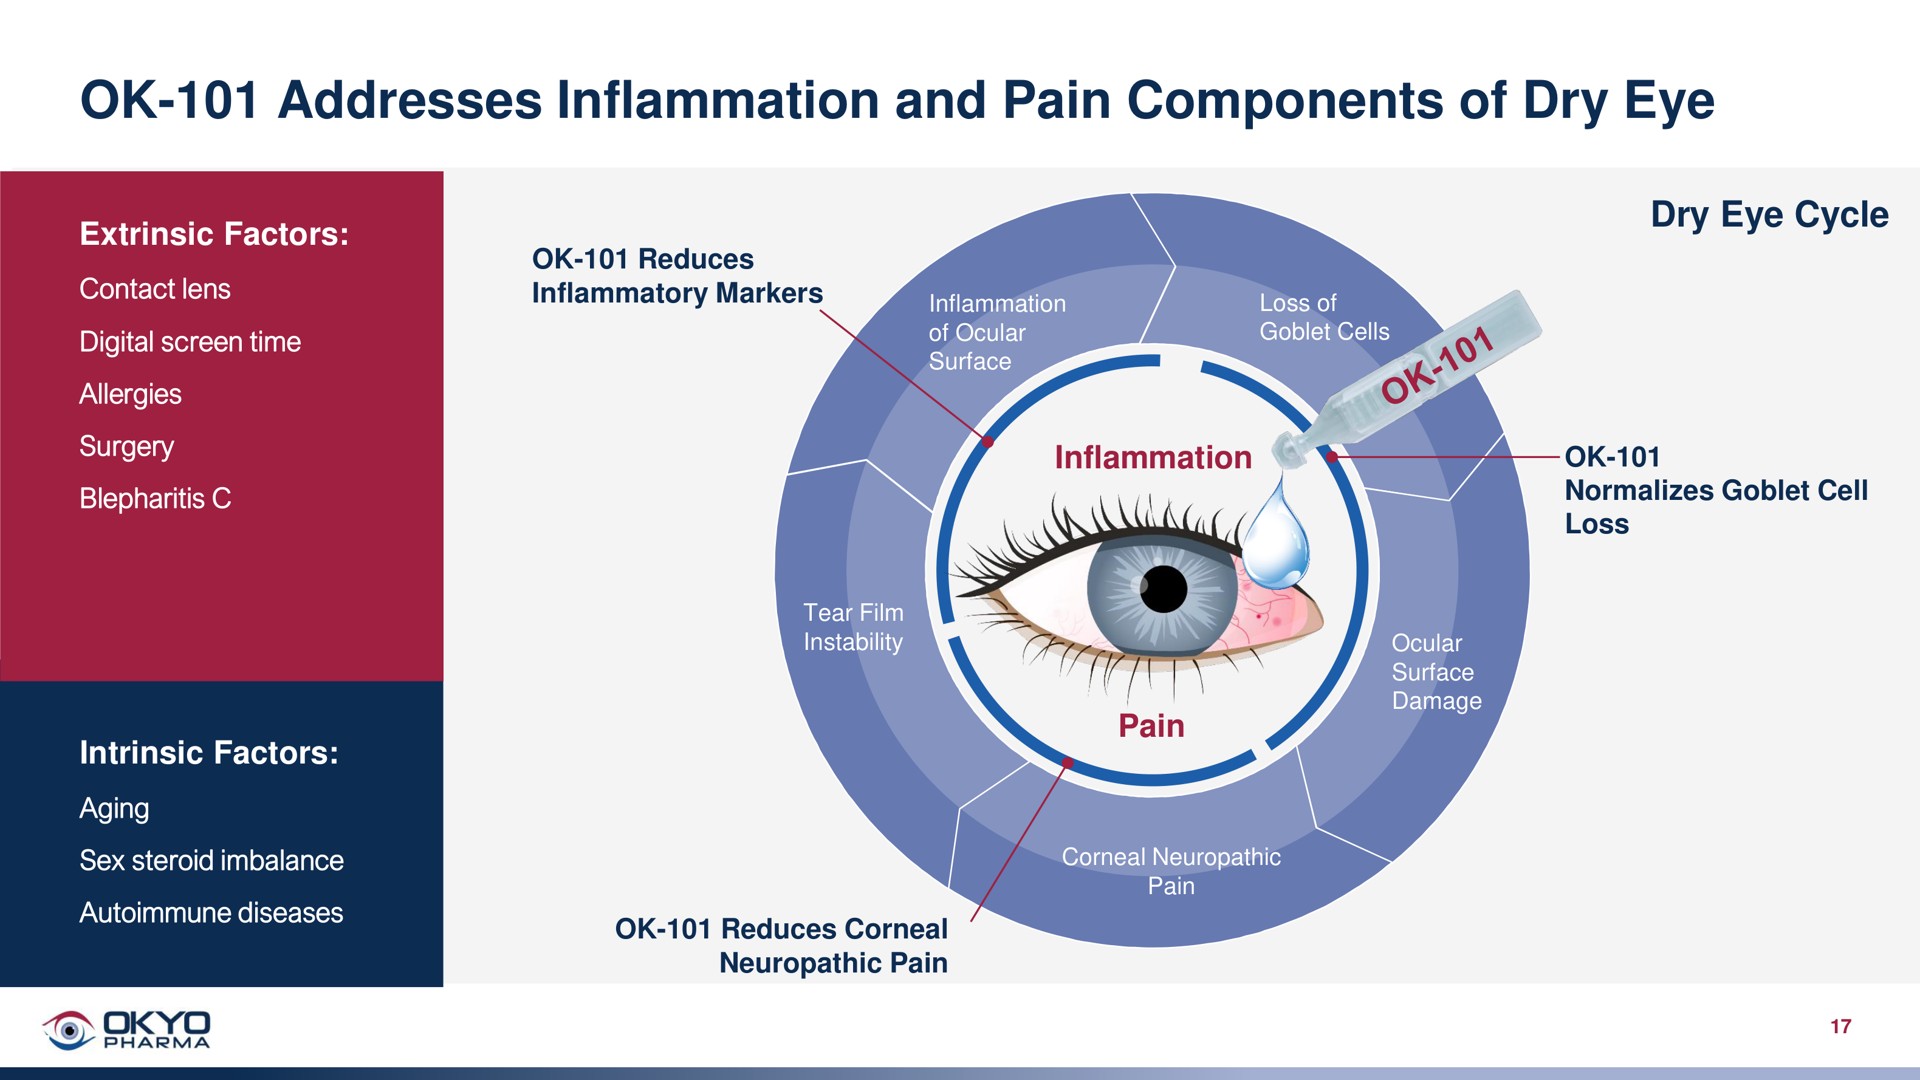 addresses inflammation and pain components of dry eye | OKYO Pharma